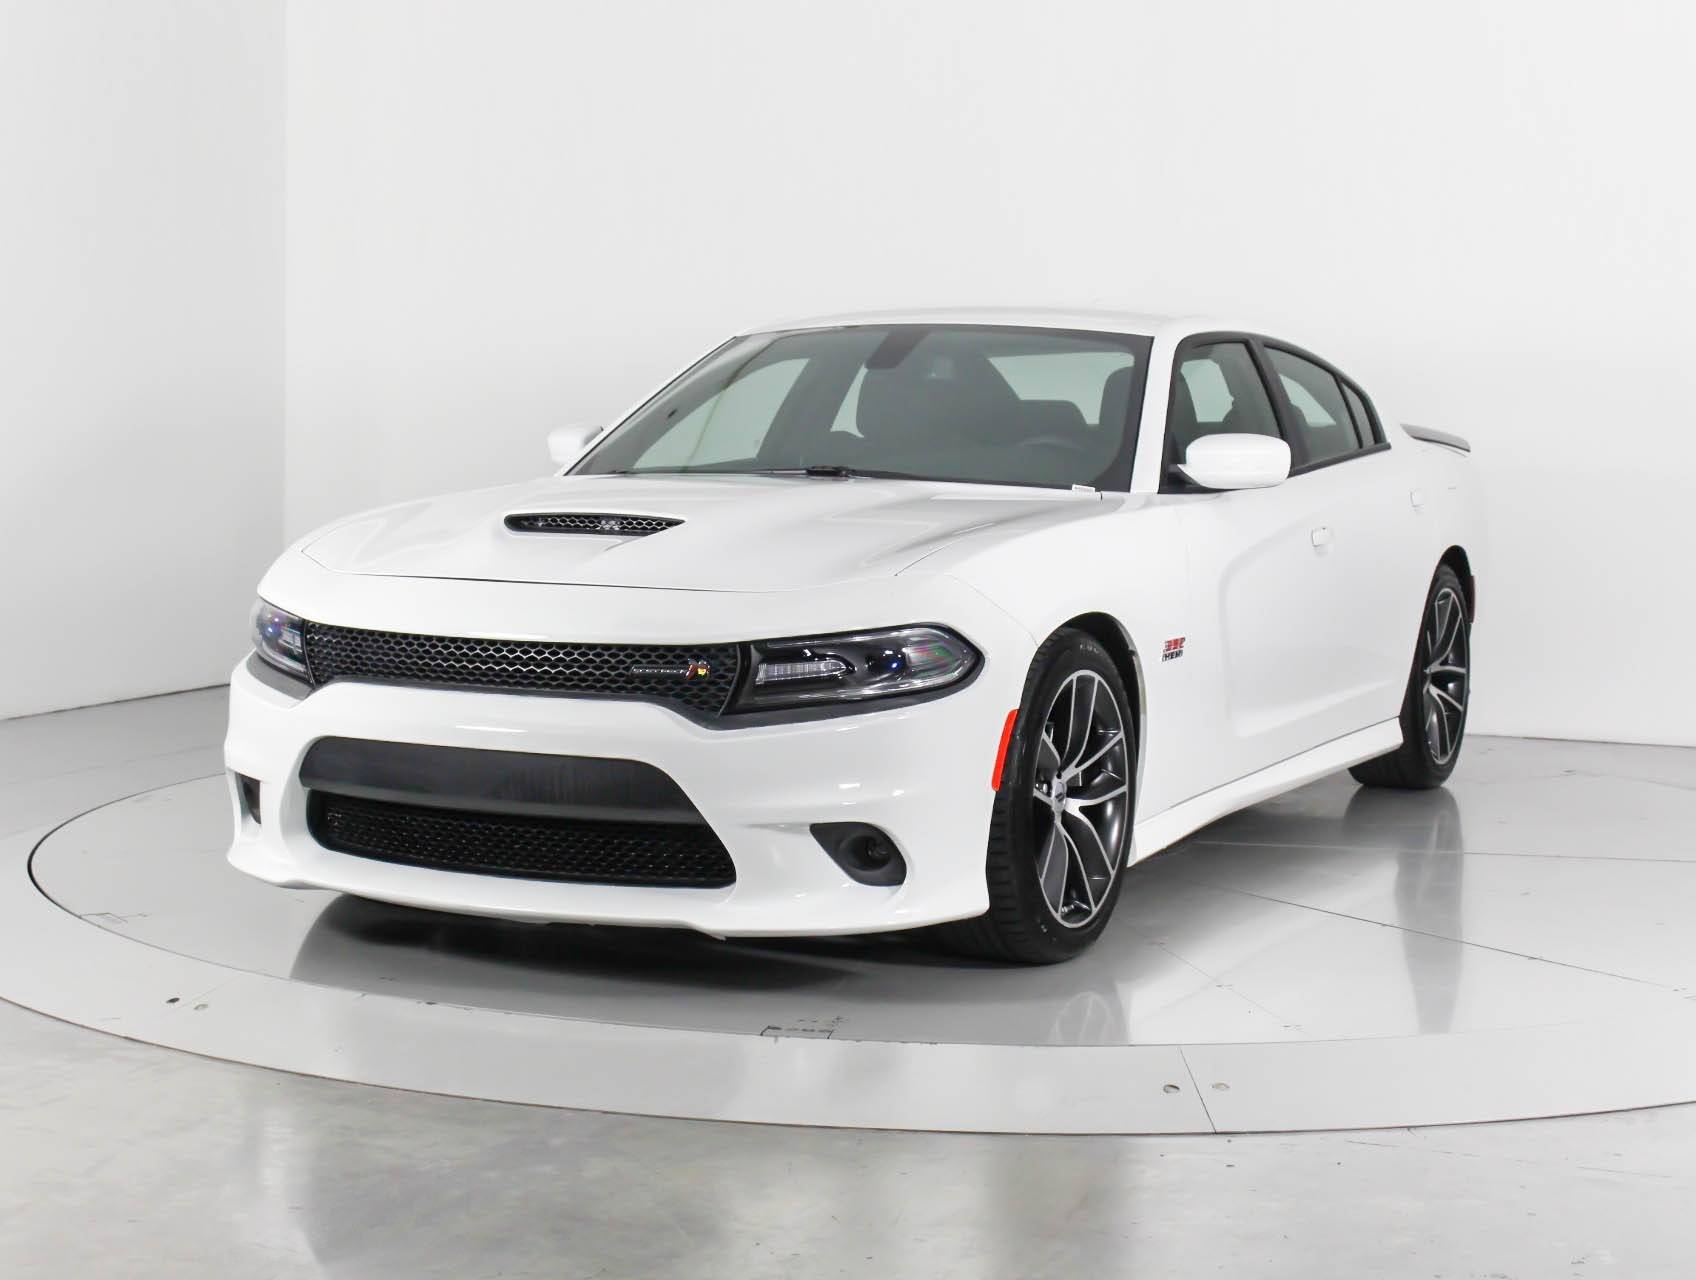 Florida Fine Cars - Used DODGE CHARGER 2018 MIAMI Srt 392 Scat Pack